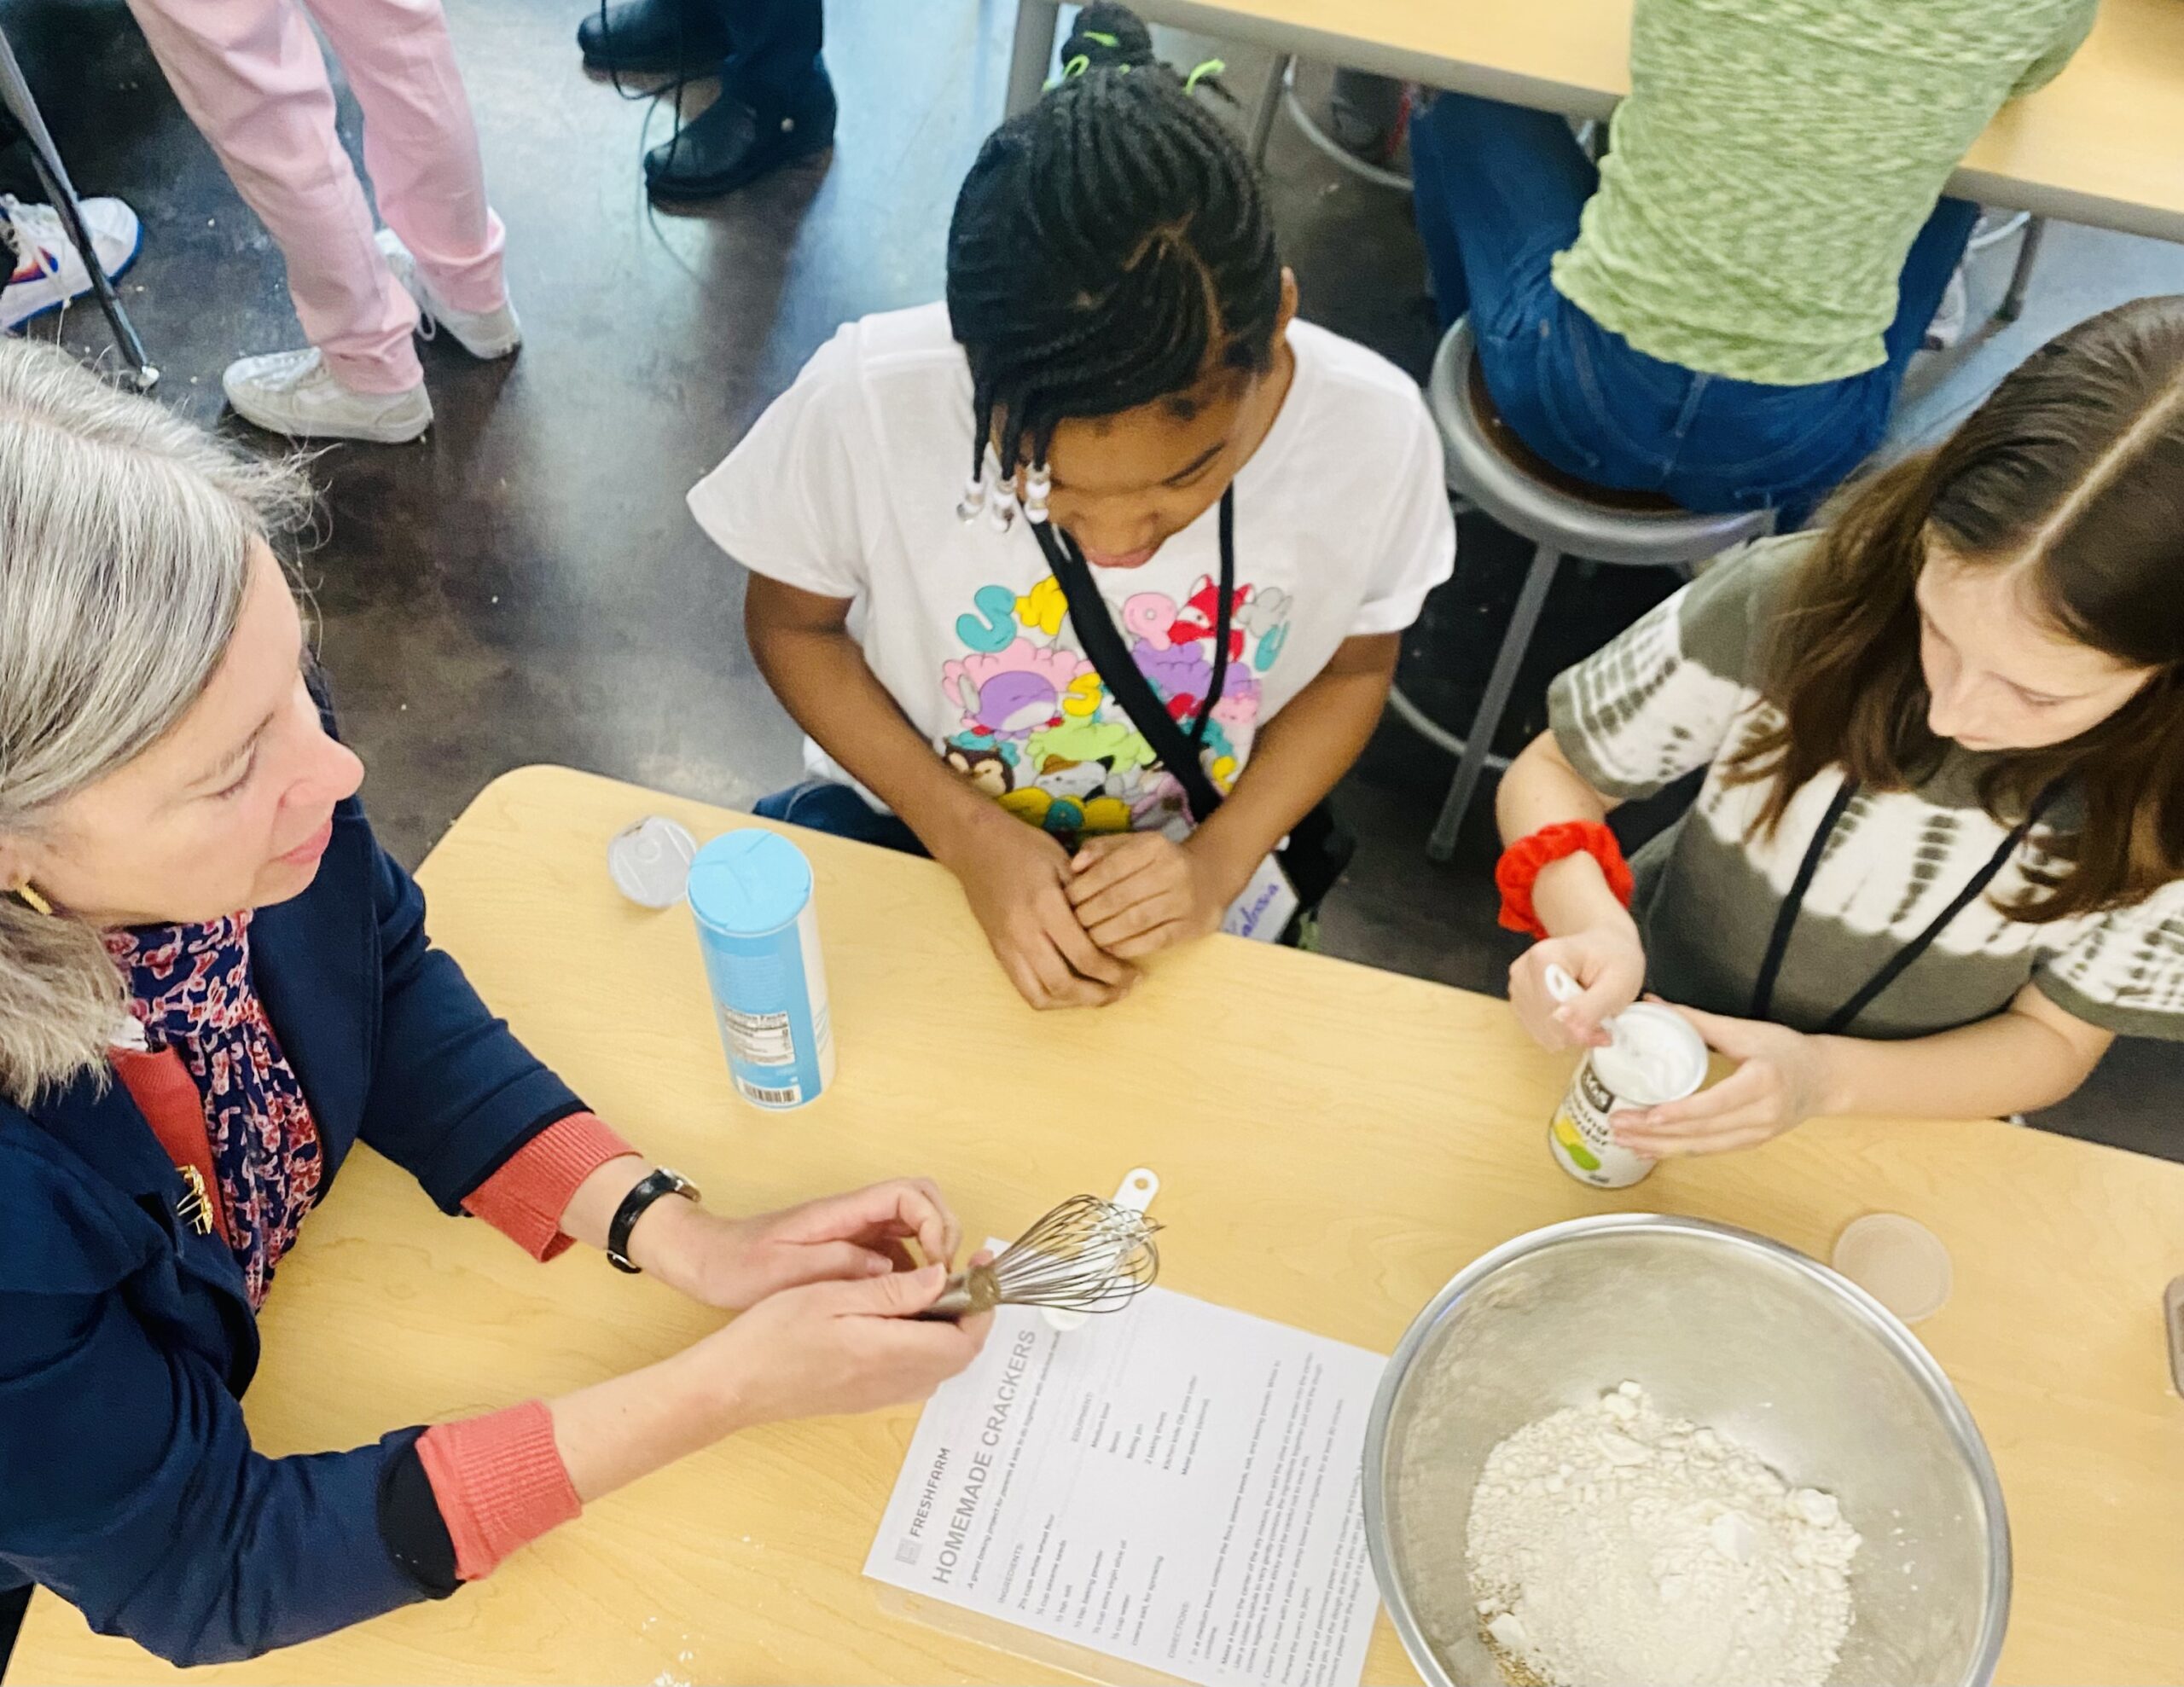 USDA's Stacy Dean sits with two fifth graders at a table - they are mixing the ingredients for whole wheat crackers in a stainless steal bowl.